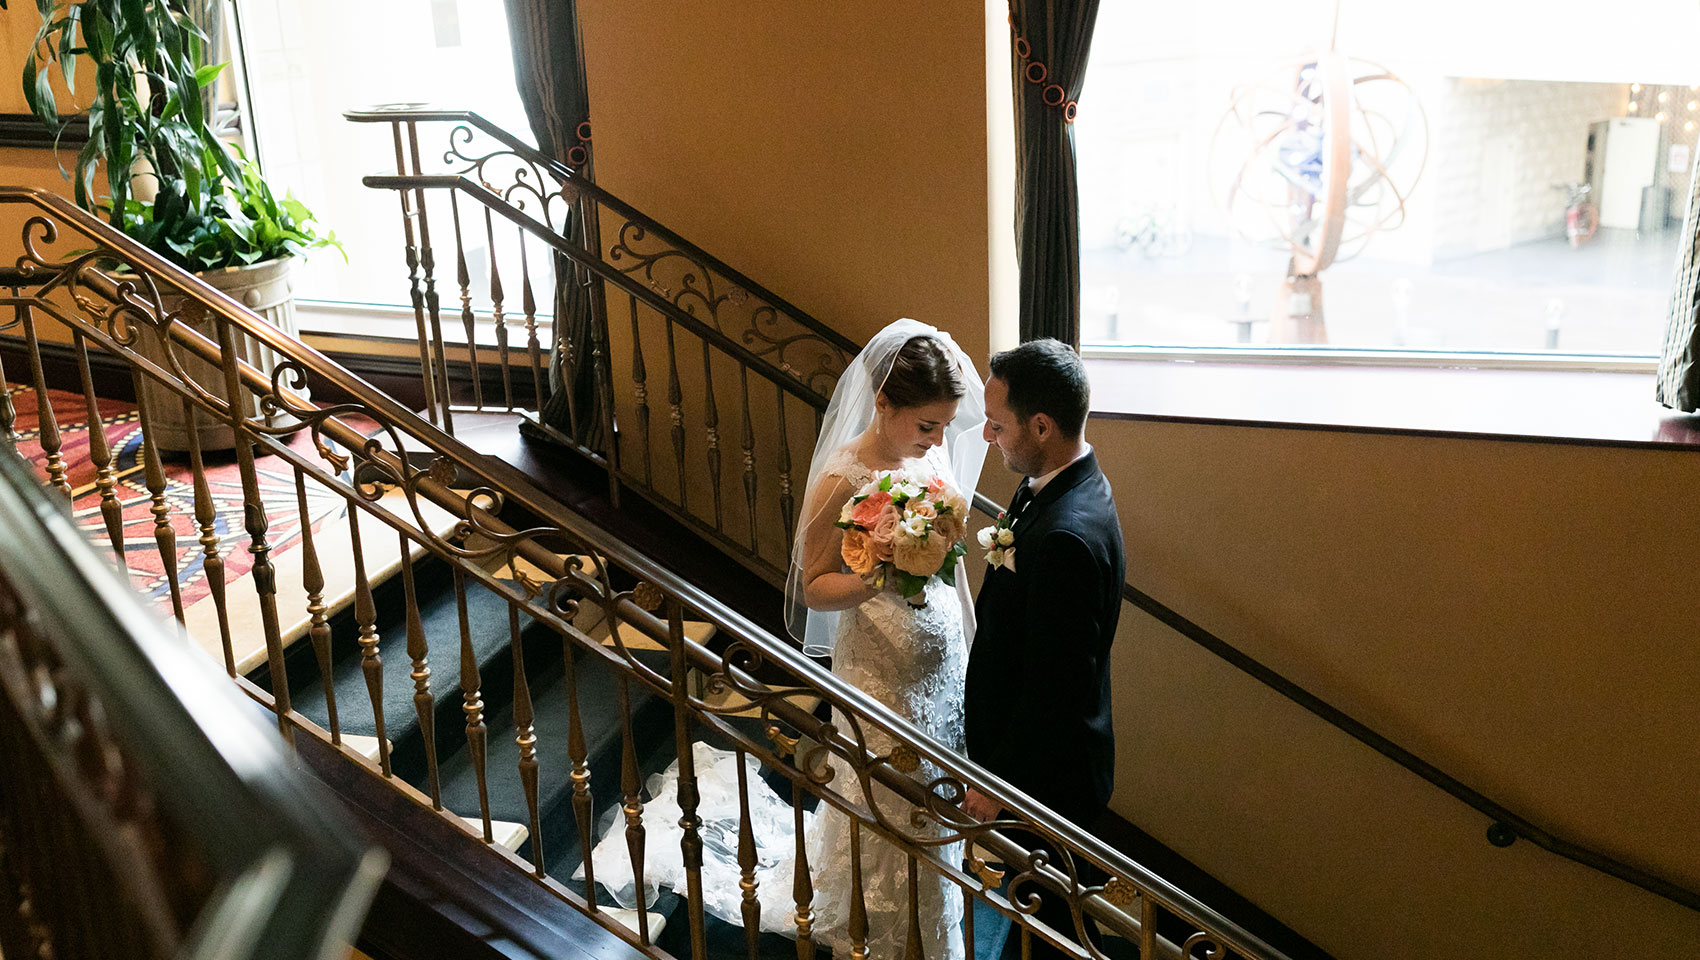 Bride and Groom on staircase in wedding attire